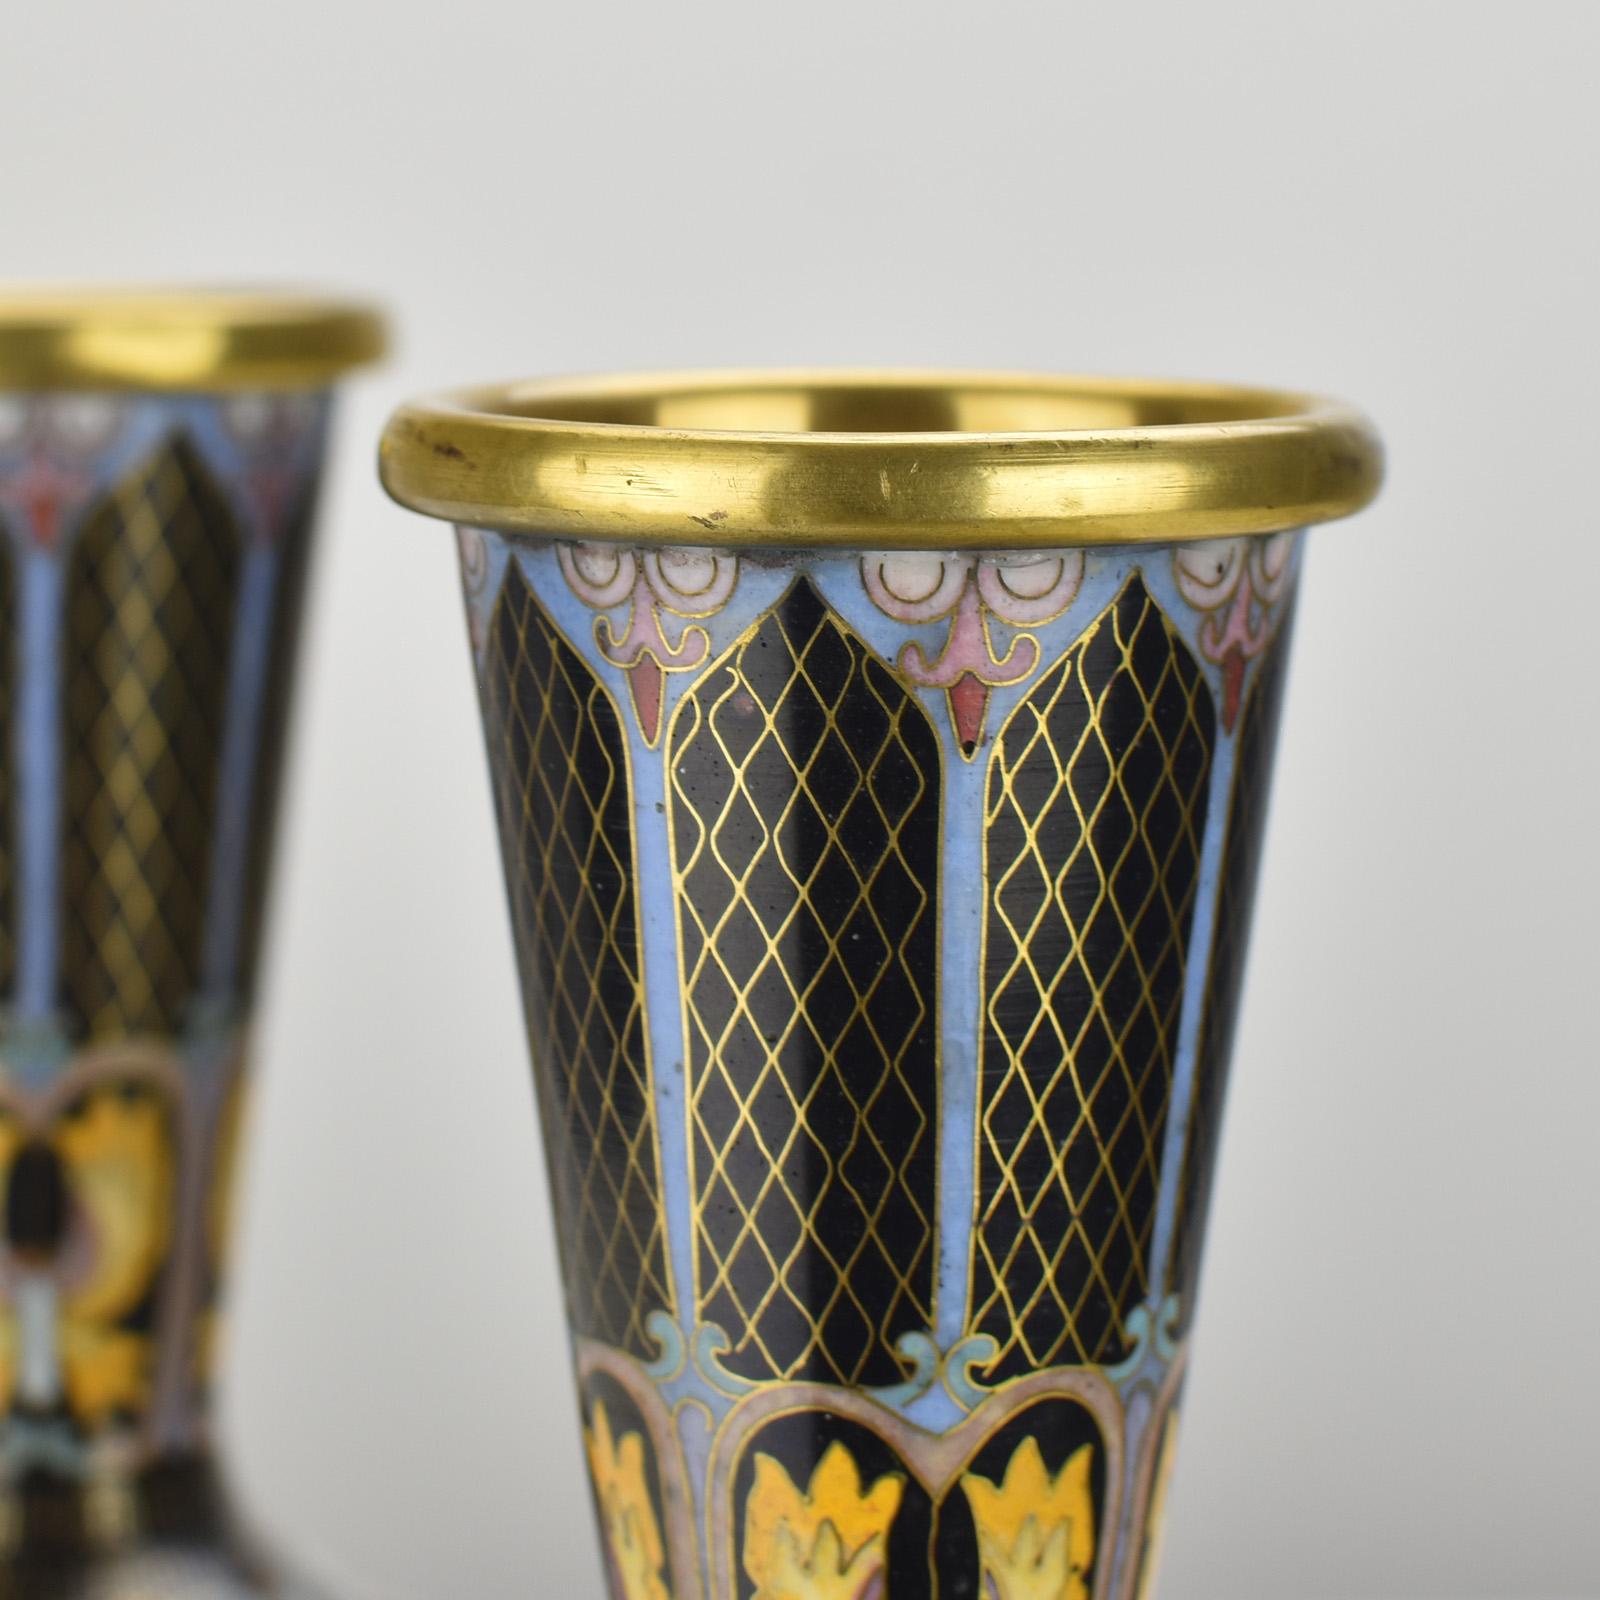 The fine pair of mirrored gilt cloisonné enamel butterfly vases from the mid 20th-century are exquisite examples of Chinese artistry and craftsmanship. These vases combine several intricate and delicate techniques, resulting in stunning decorative